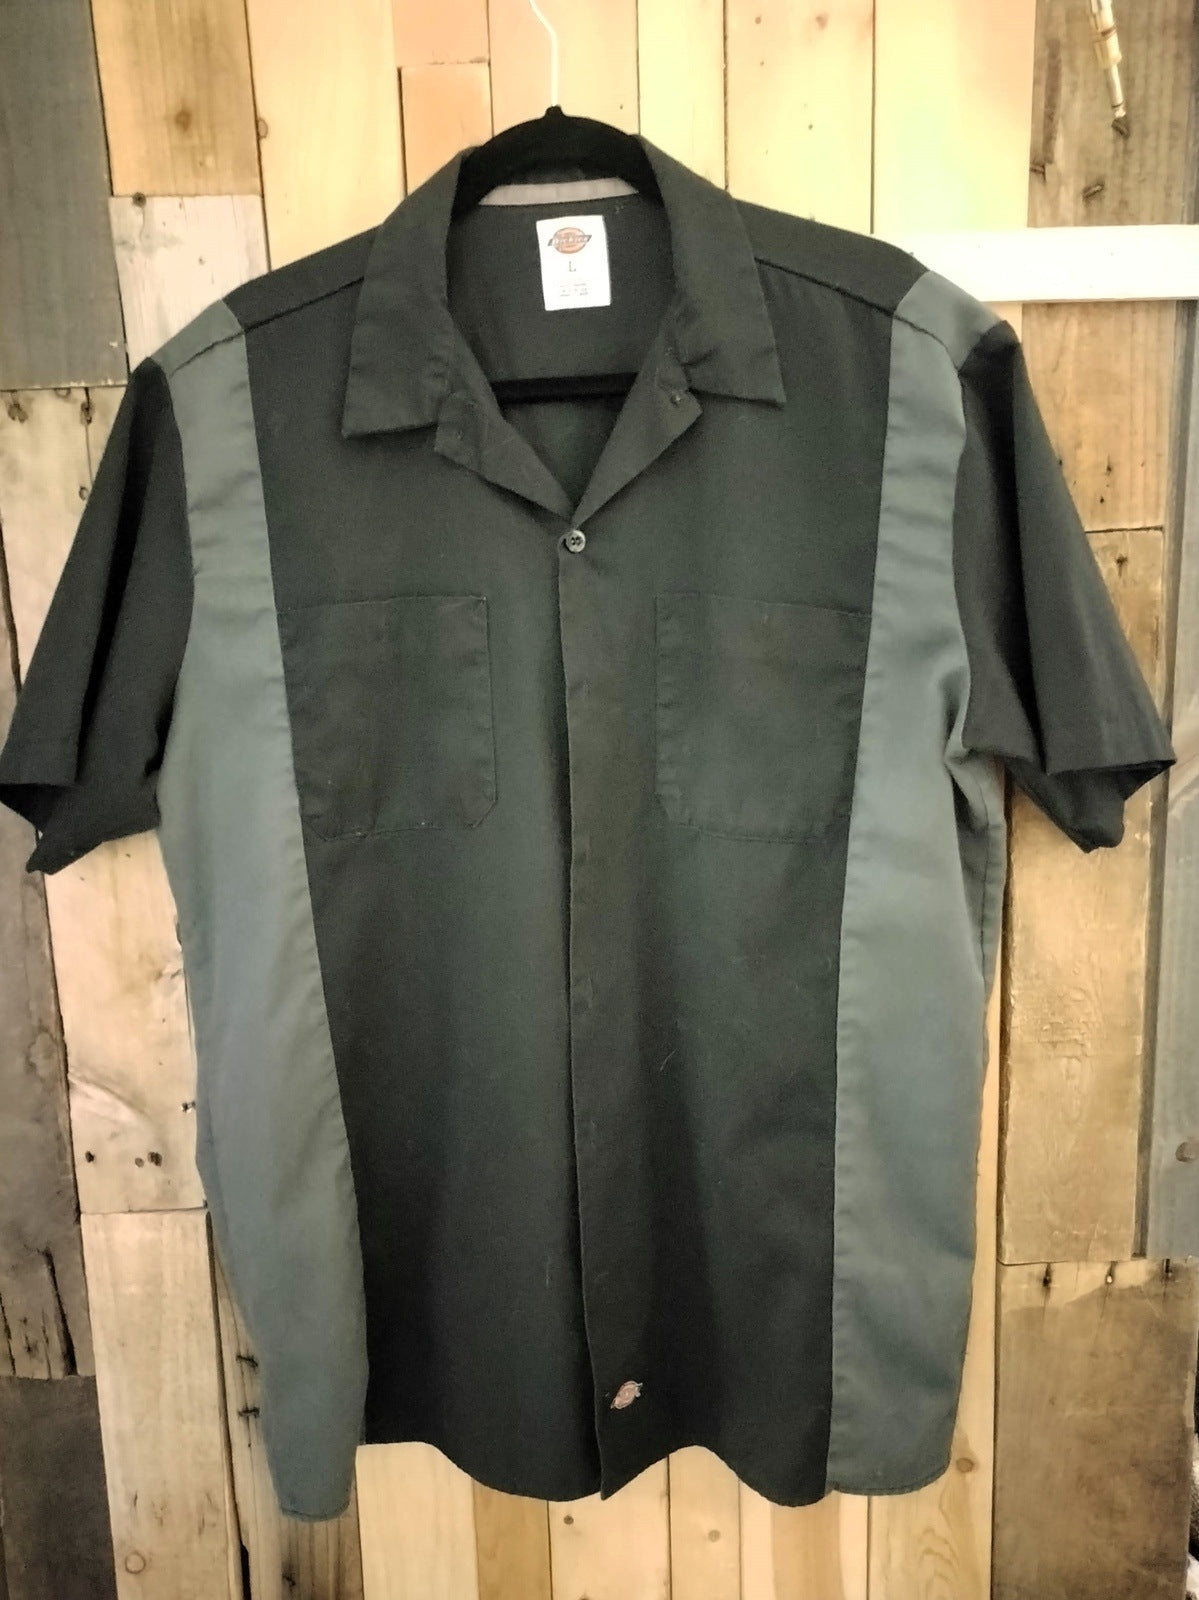 Dickies Men's Size Large Short Sleeve Work Shirt Black and Charcoal